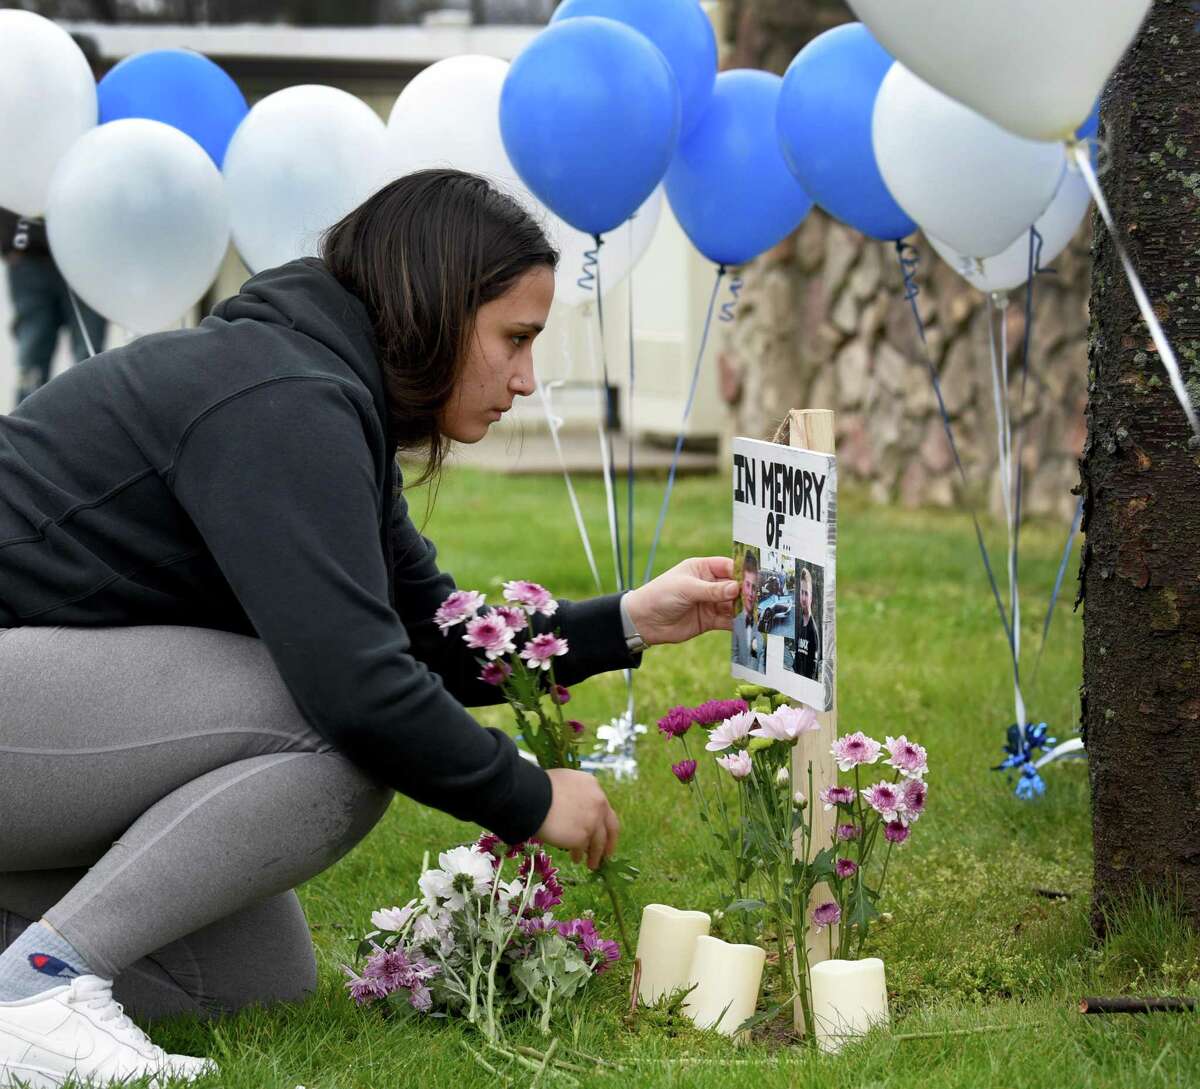 Kassidy Lopez, above, a close friend of Brandon Forlastro, places flowers near his photograph before a candle-lighting vigil Monday evening near 243 Danbury Road in New Milford. The vigil is to remember Brandon, who died in a motorcycle accident Sunday.